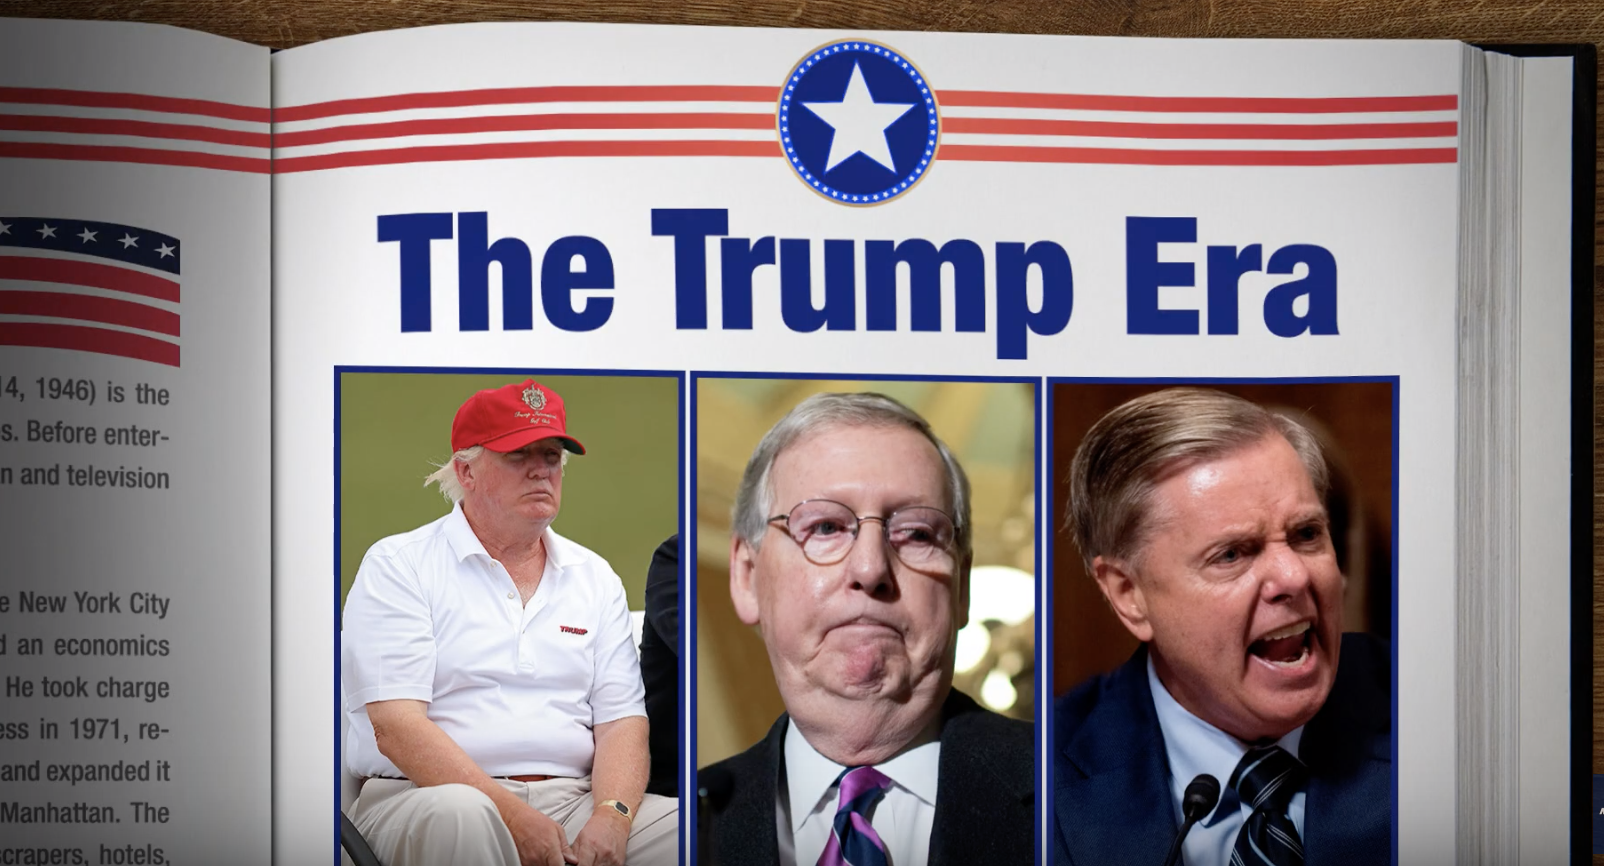 An image showing photos of Donald Trump, Mitch McConnell, and Lindsey Graham.